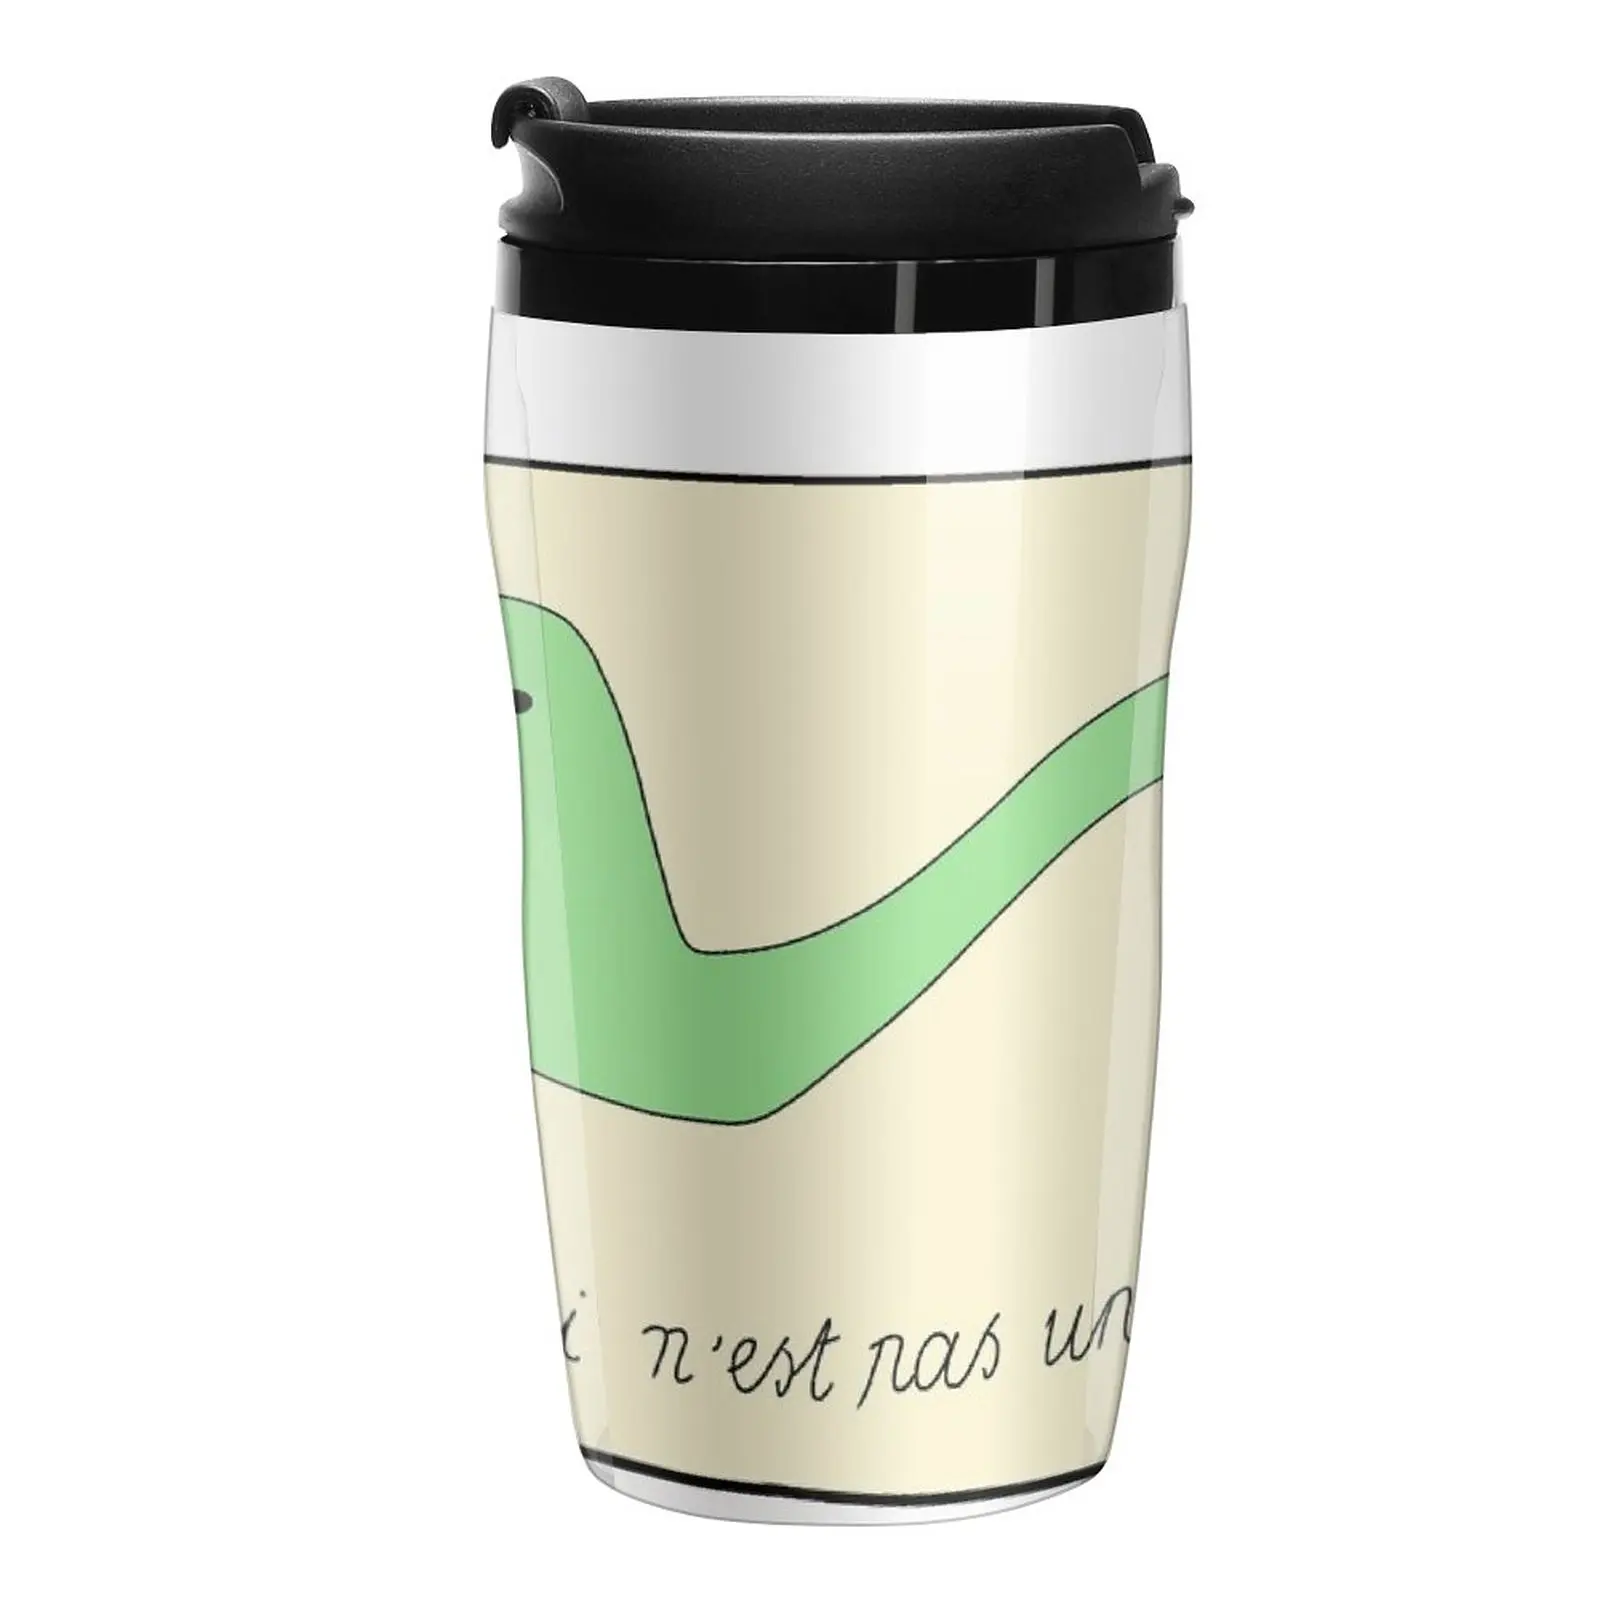 

Ceci n'est pas une Snek Travel Coffee Mug Large Coffee Cups Coffee Glasses Coffee Cup Espresso Cups For Cafe